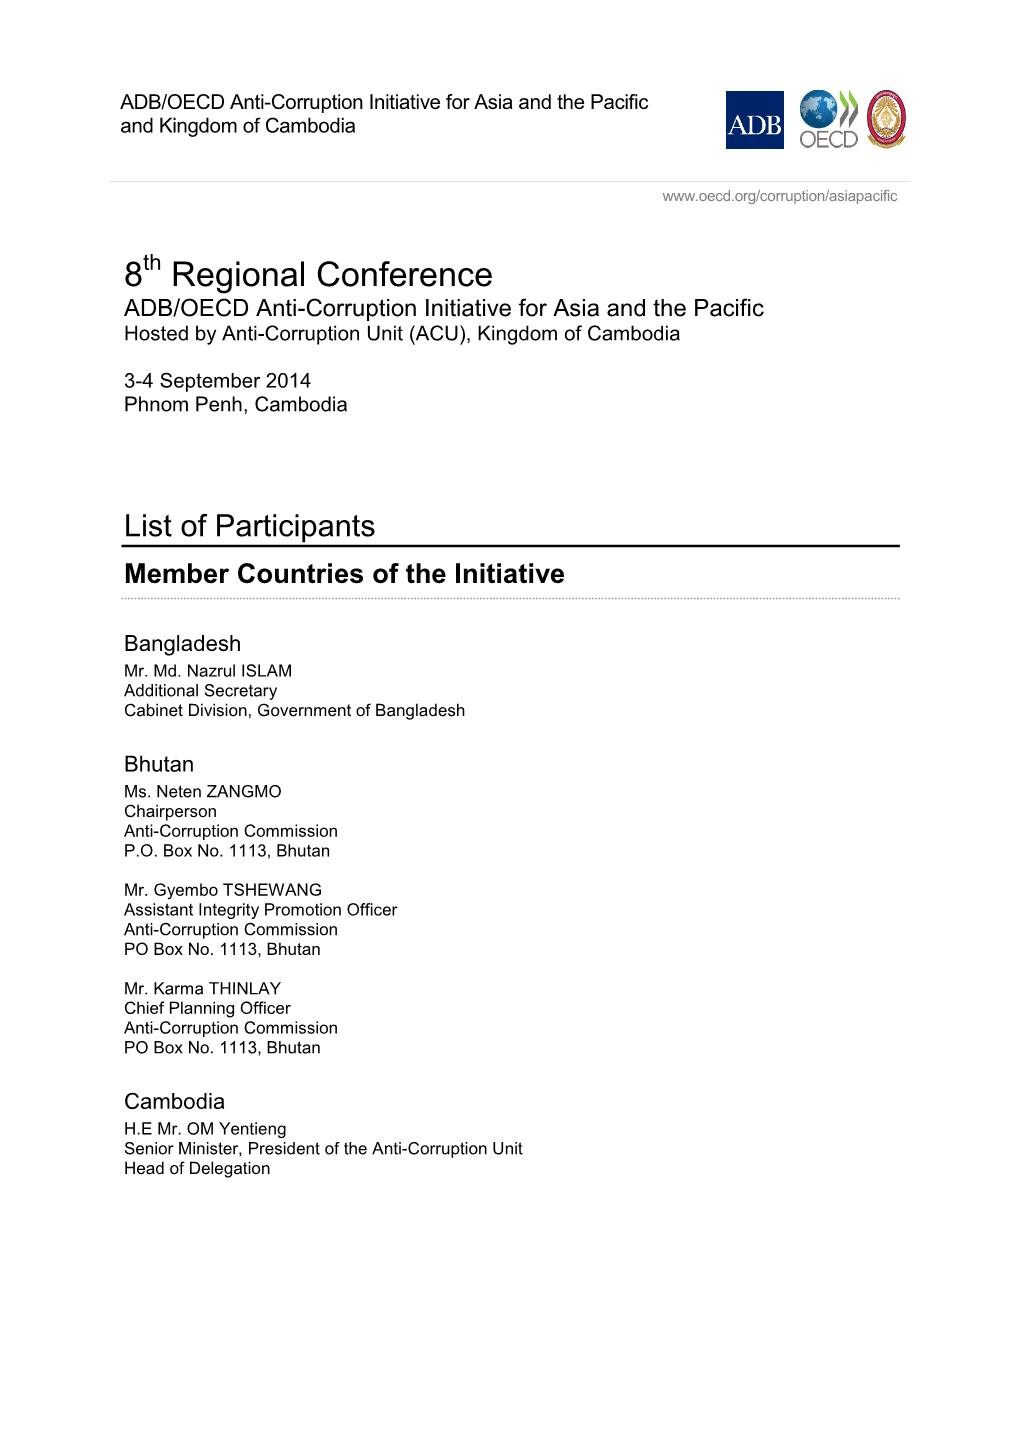 List of Participants Member Countries of the Initiative